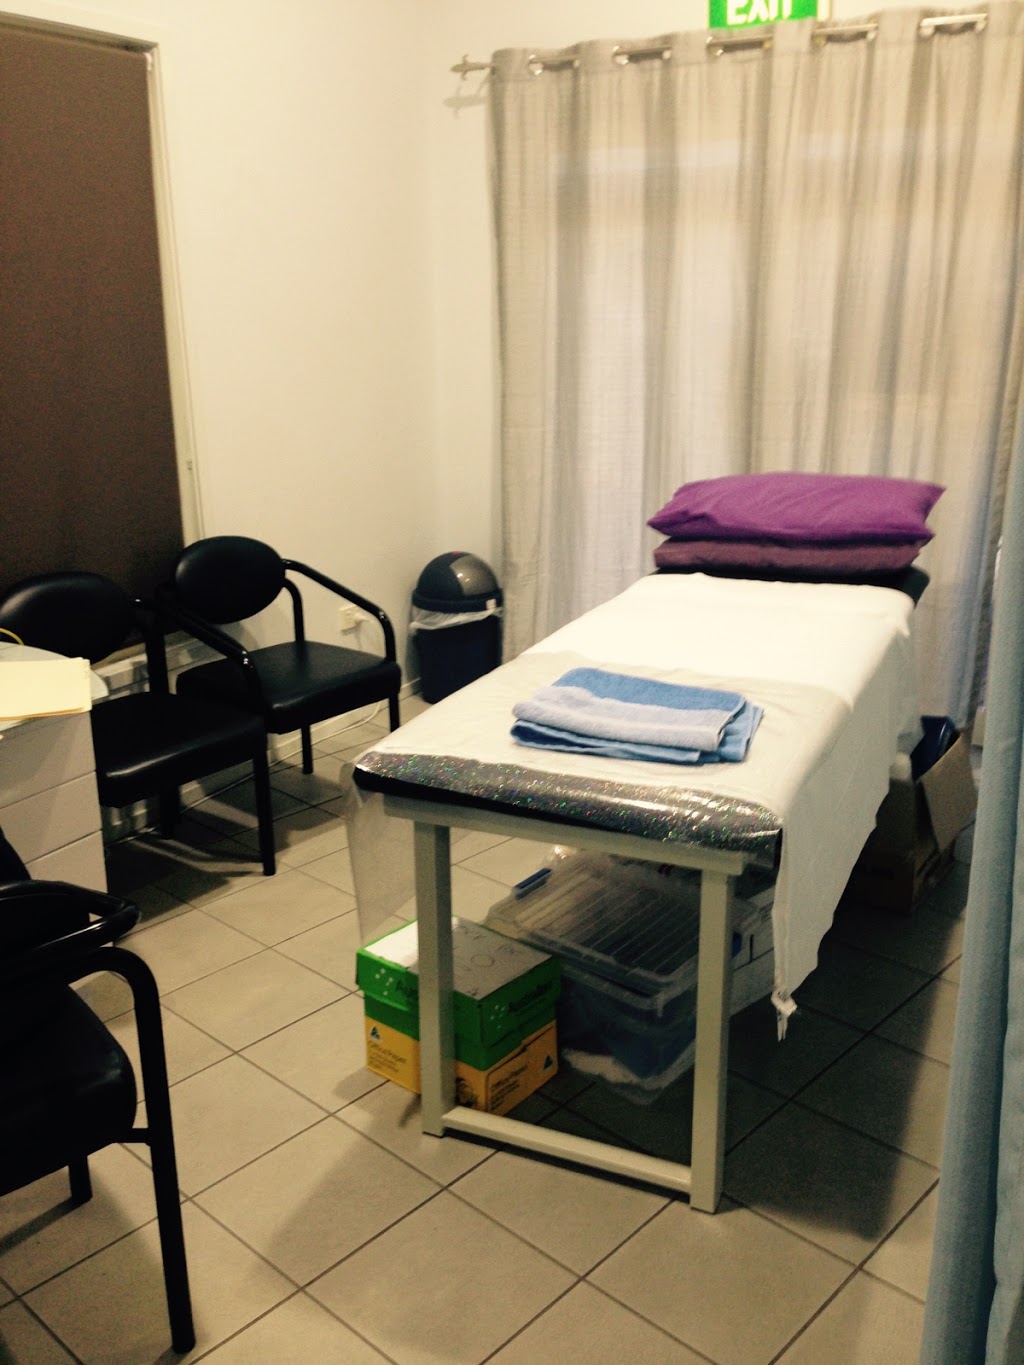 Active Physio Health | 2 Rafting Ground Rd, Agnes Water QLD 4677, Australia | Phone: (07) 4972 5155